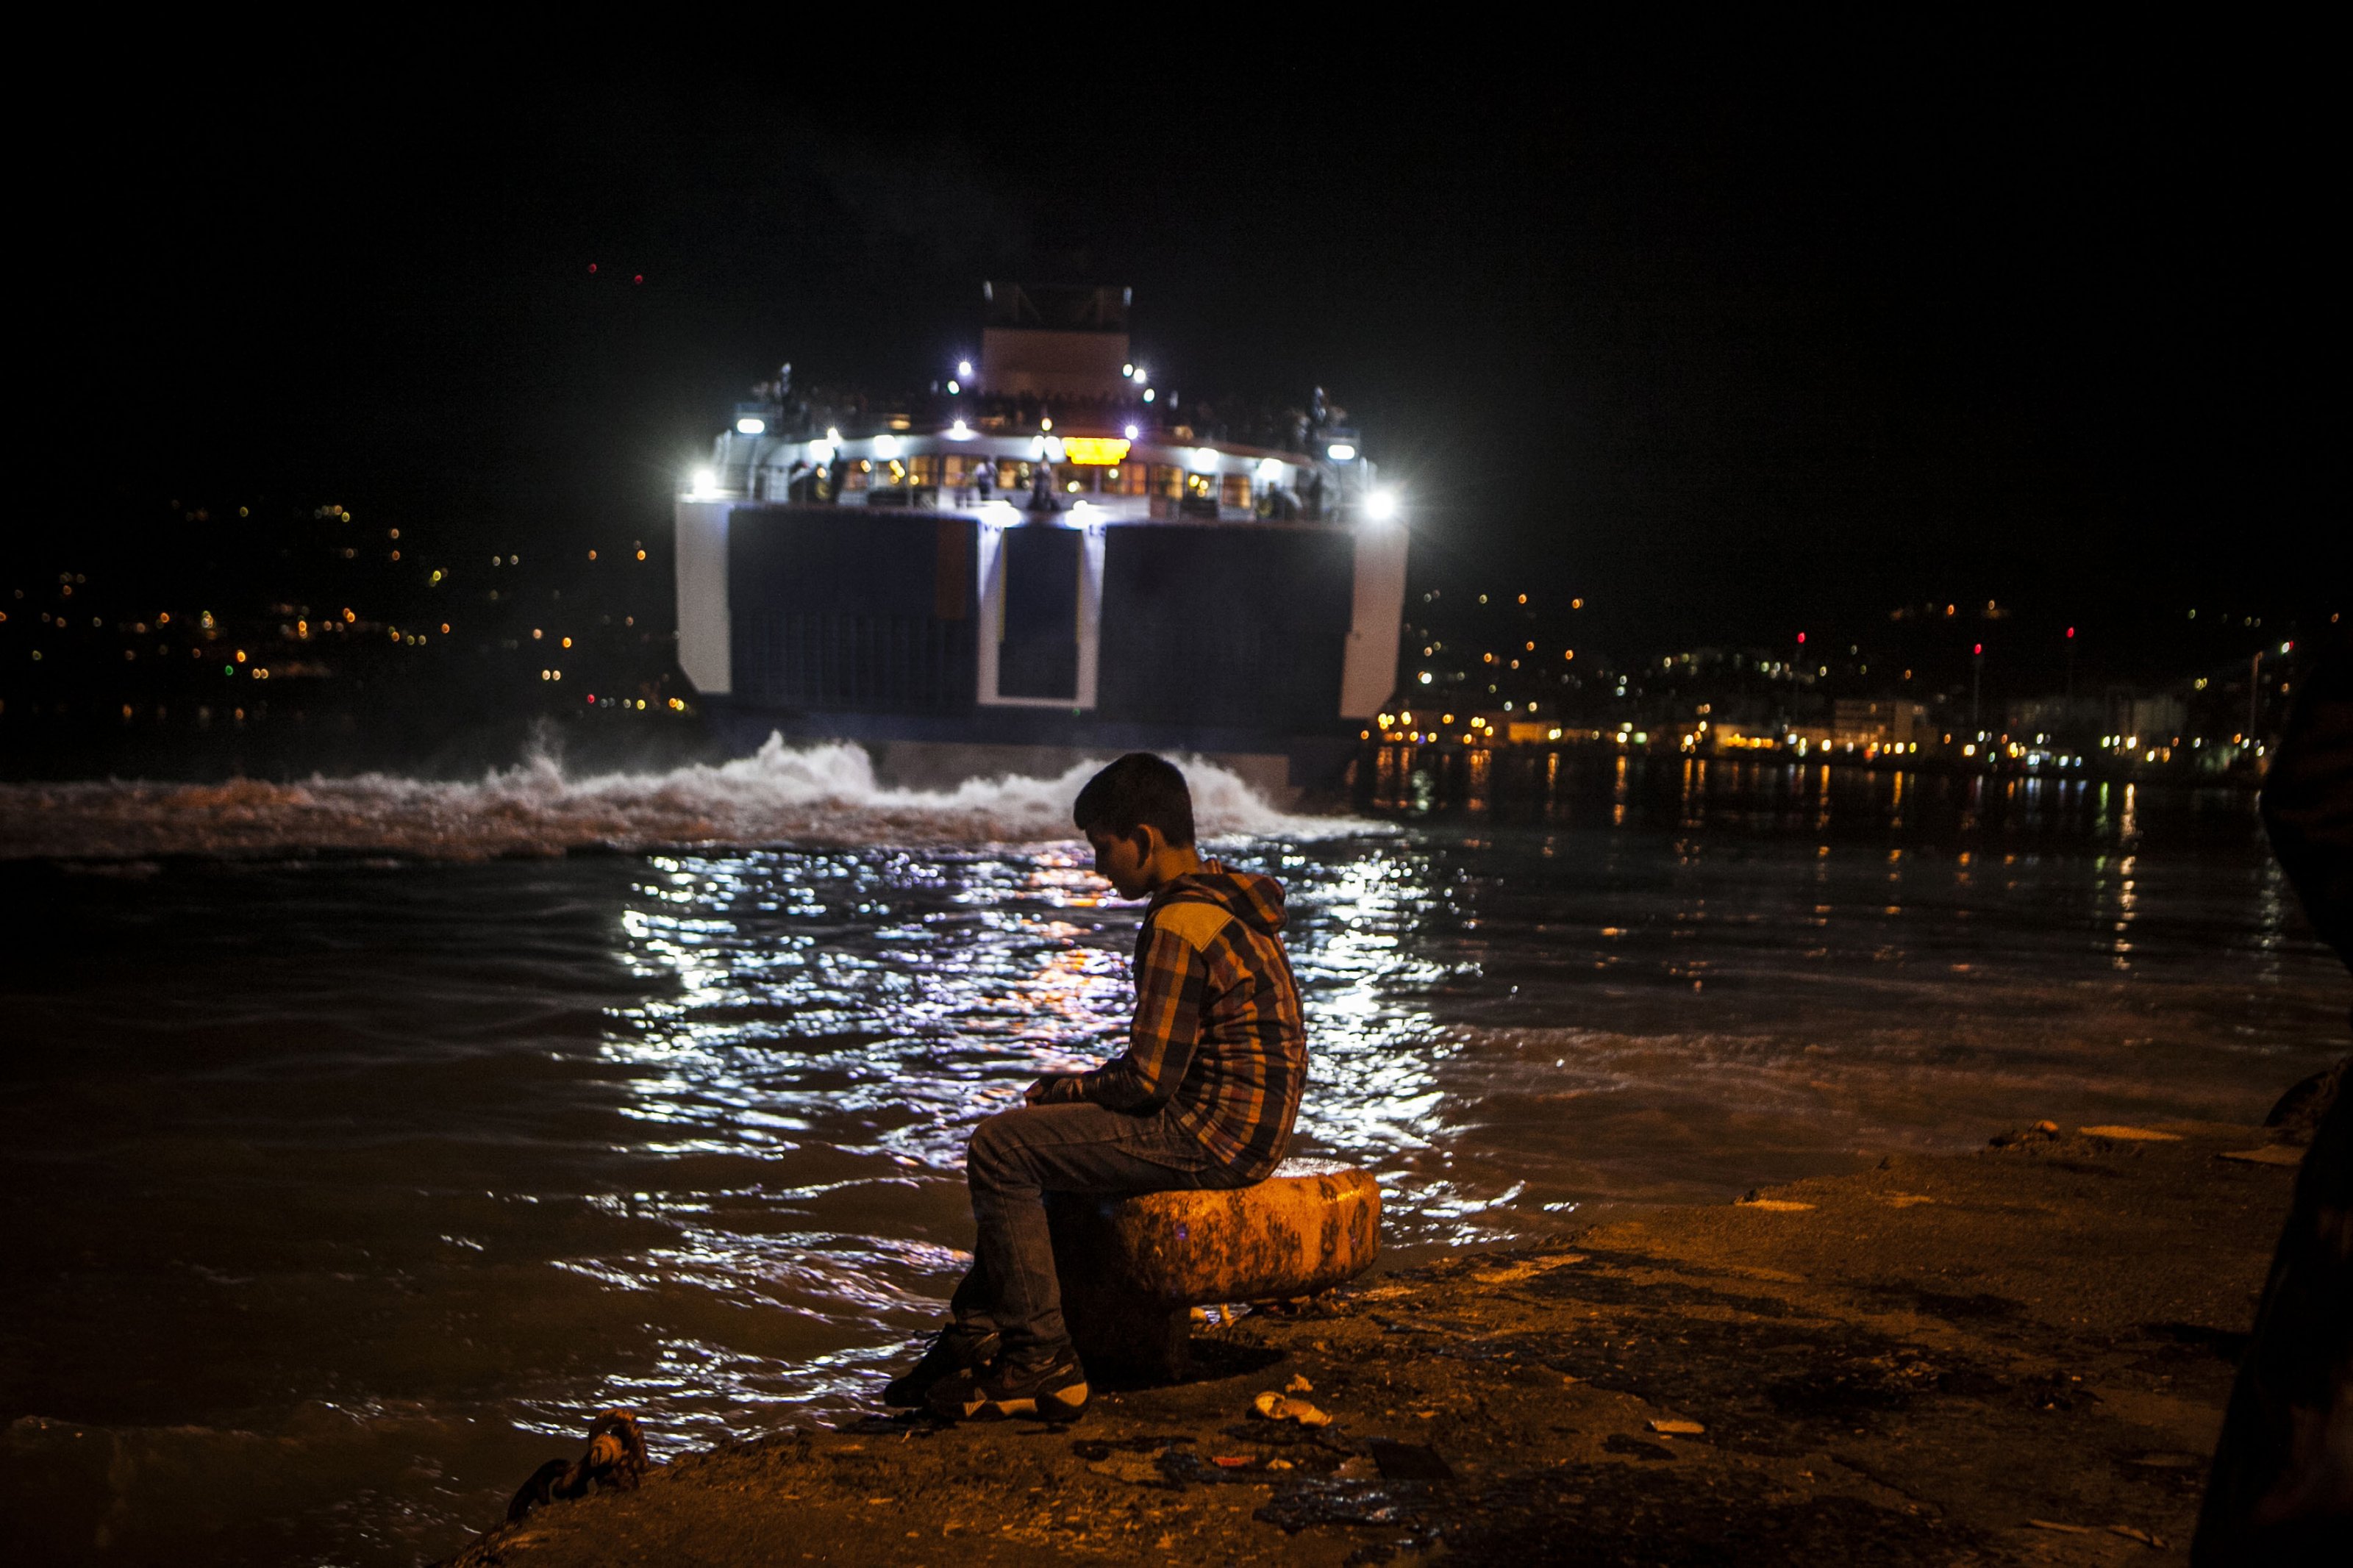 Syrian and Afghan refugees who successfully entered Europe by the sea, continue their journey. A majority of them is trying to find refuge in Germany. While waiting for their documents and ships that will carry them forth to Athens, the refugees built camps at the port and in other corners of the island. Lesbos, Greece, September 28, 2015. Photo by Cigdem Ucuncu/NarPhotos/ABACAPRESS.COM